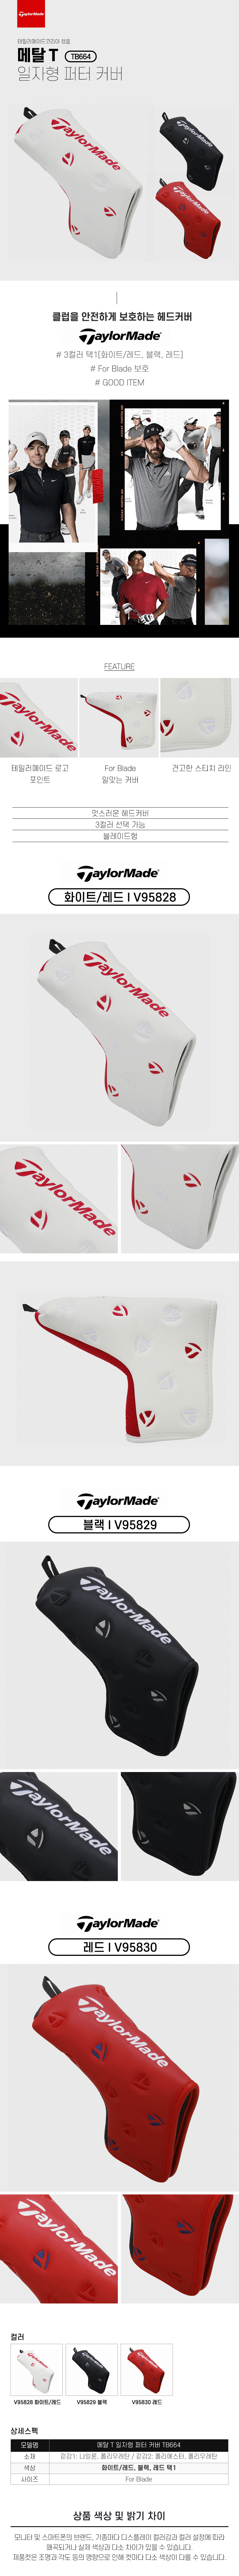 taylormade_metal_T_puttrer_cover_TB664_22.jpg